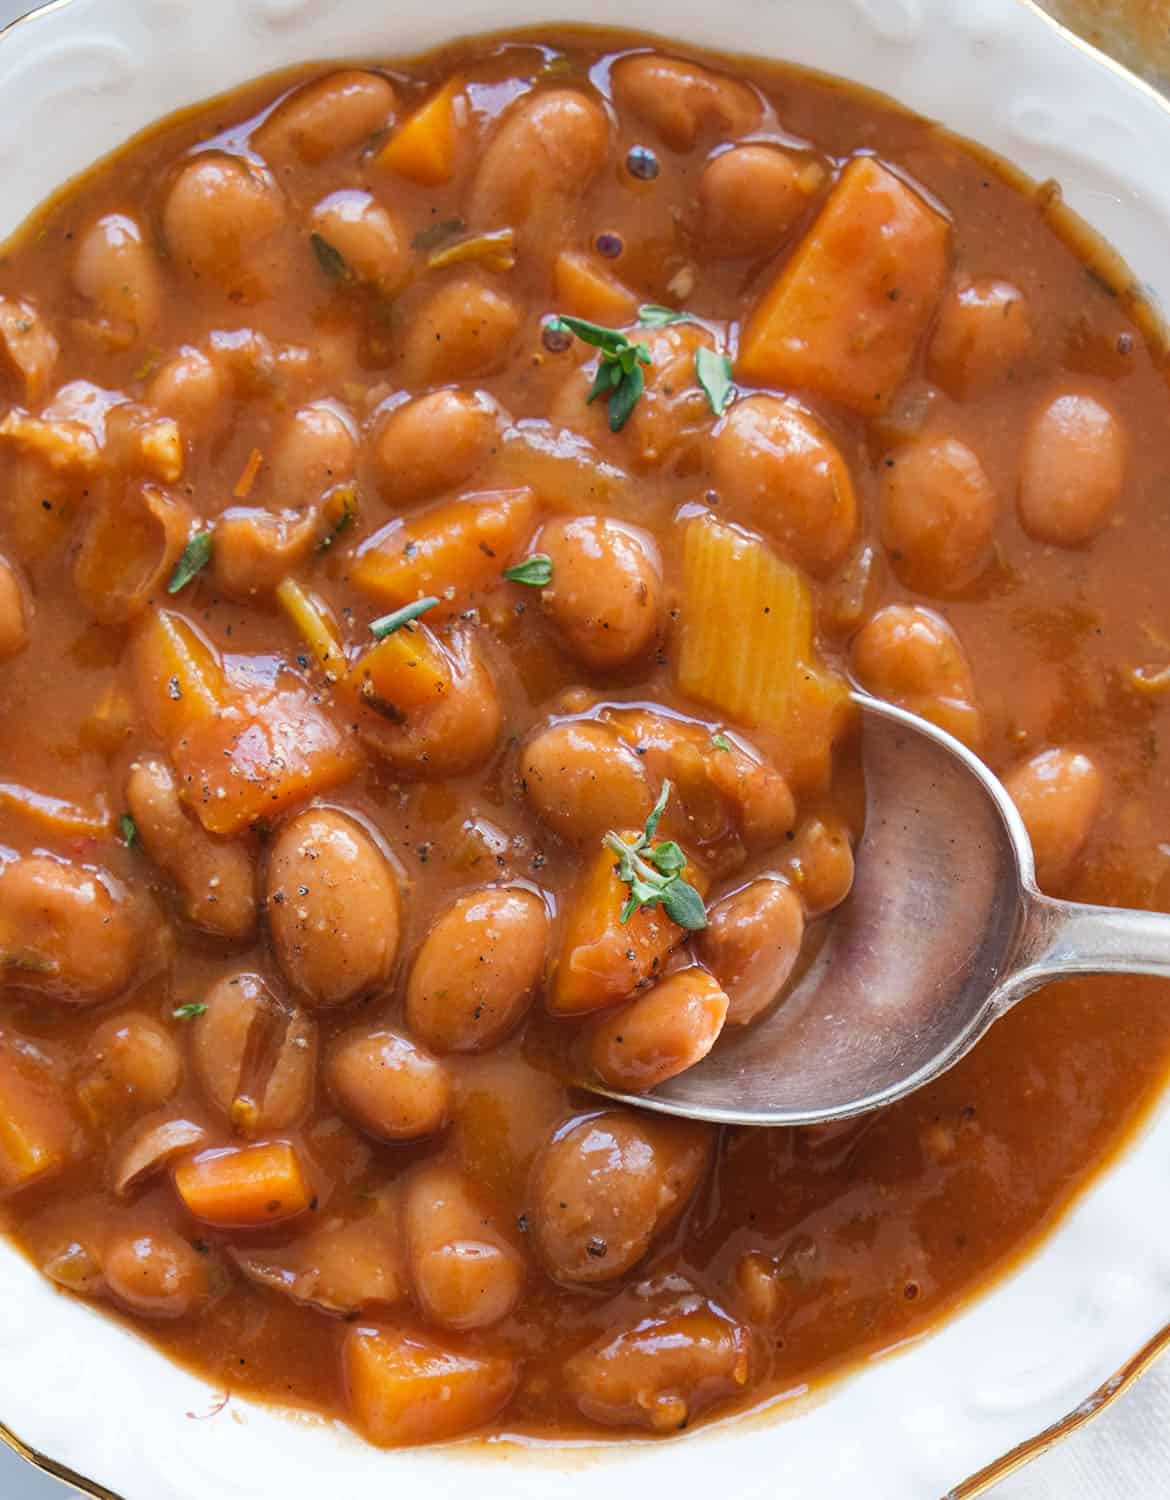 Hearty Bean Stew - The clever meal